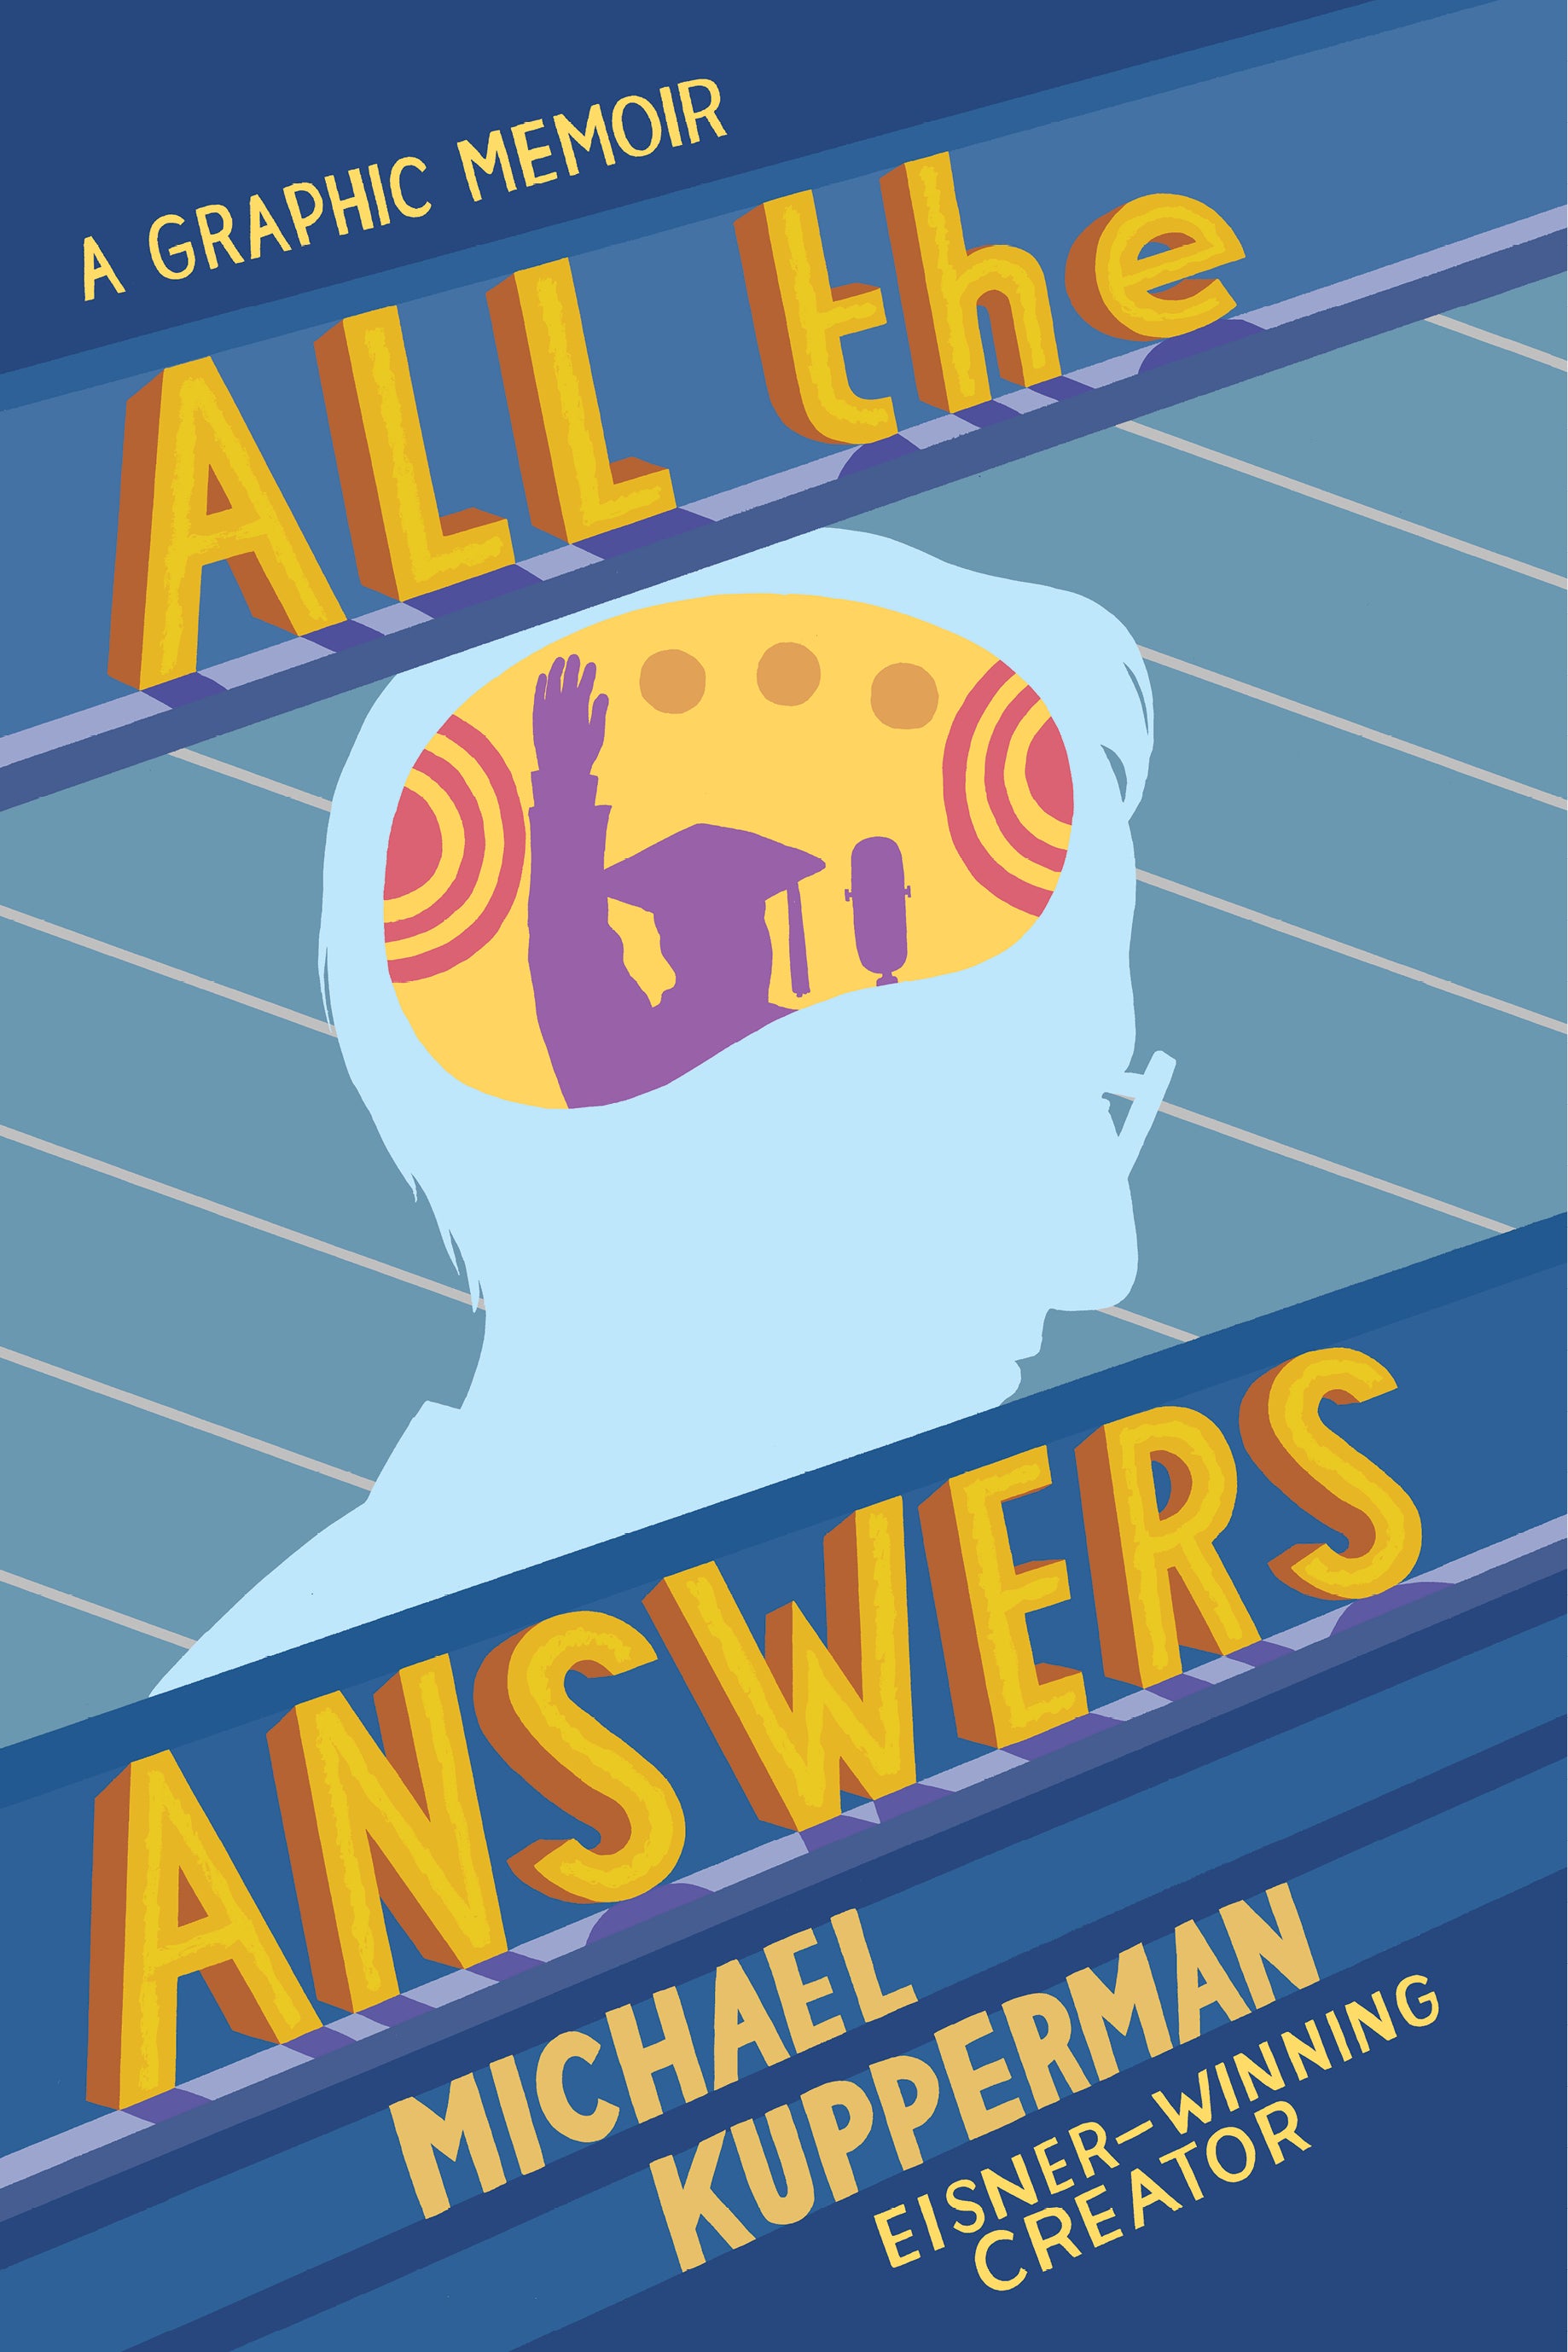 All the Answers book cover.